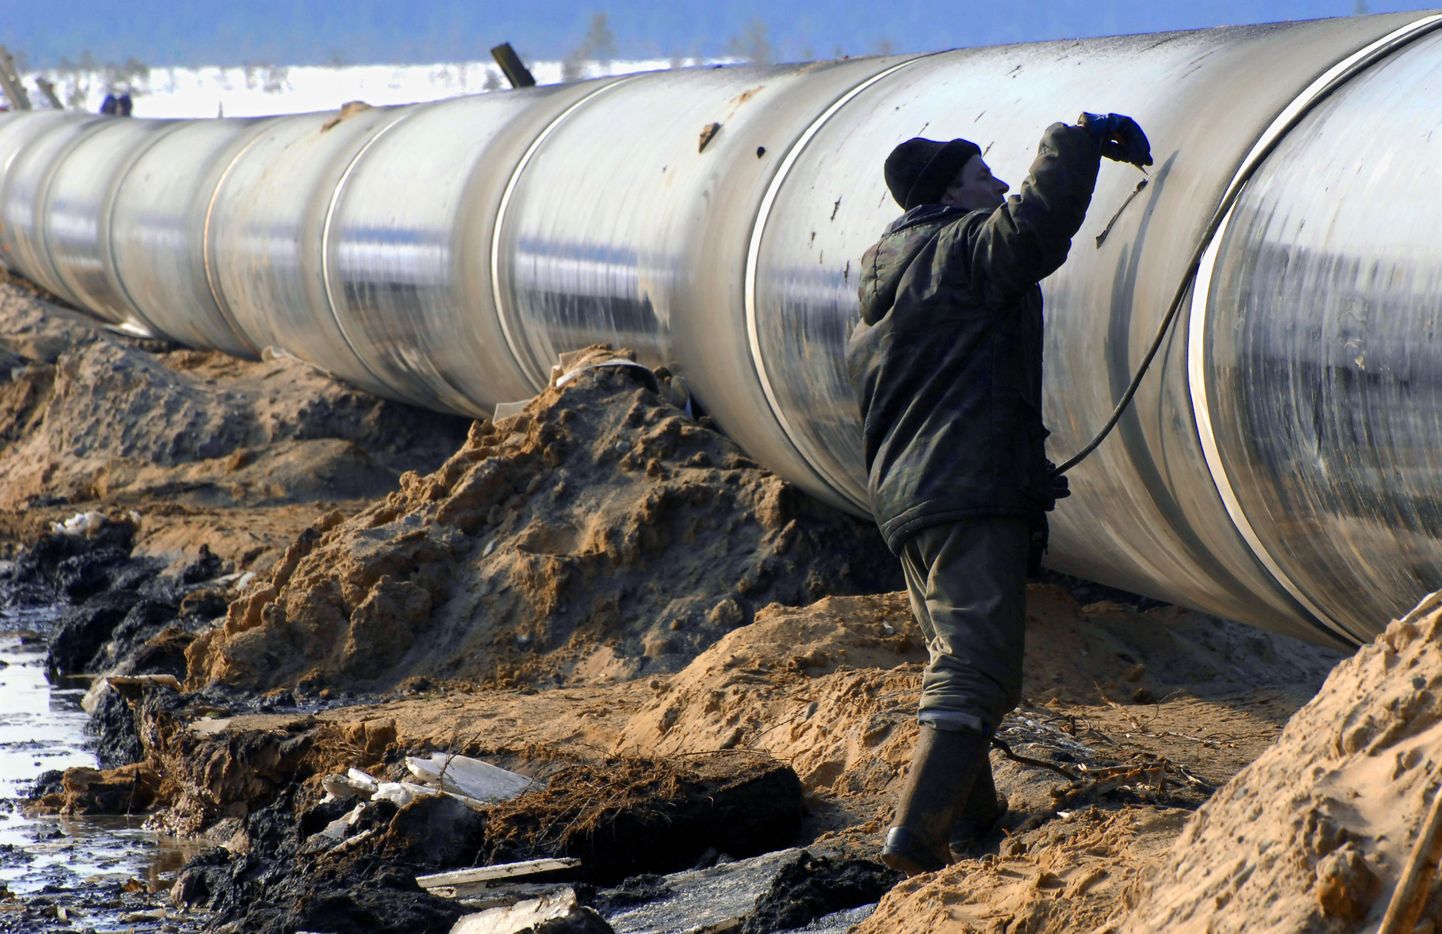 ITAR-TASS 57: LENINGRAD REGION, RUSSIA. MARCH 17. Worker welds a pipe at the Gryazovets-Vyborg section of the North European Gas Pipeline, the construction of which is carried out by Gazprom. (Photo ITAR-TASS / Yuri Belinsky)